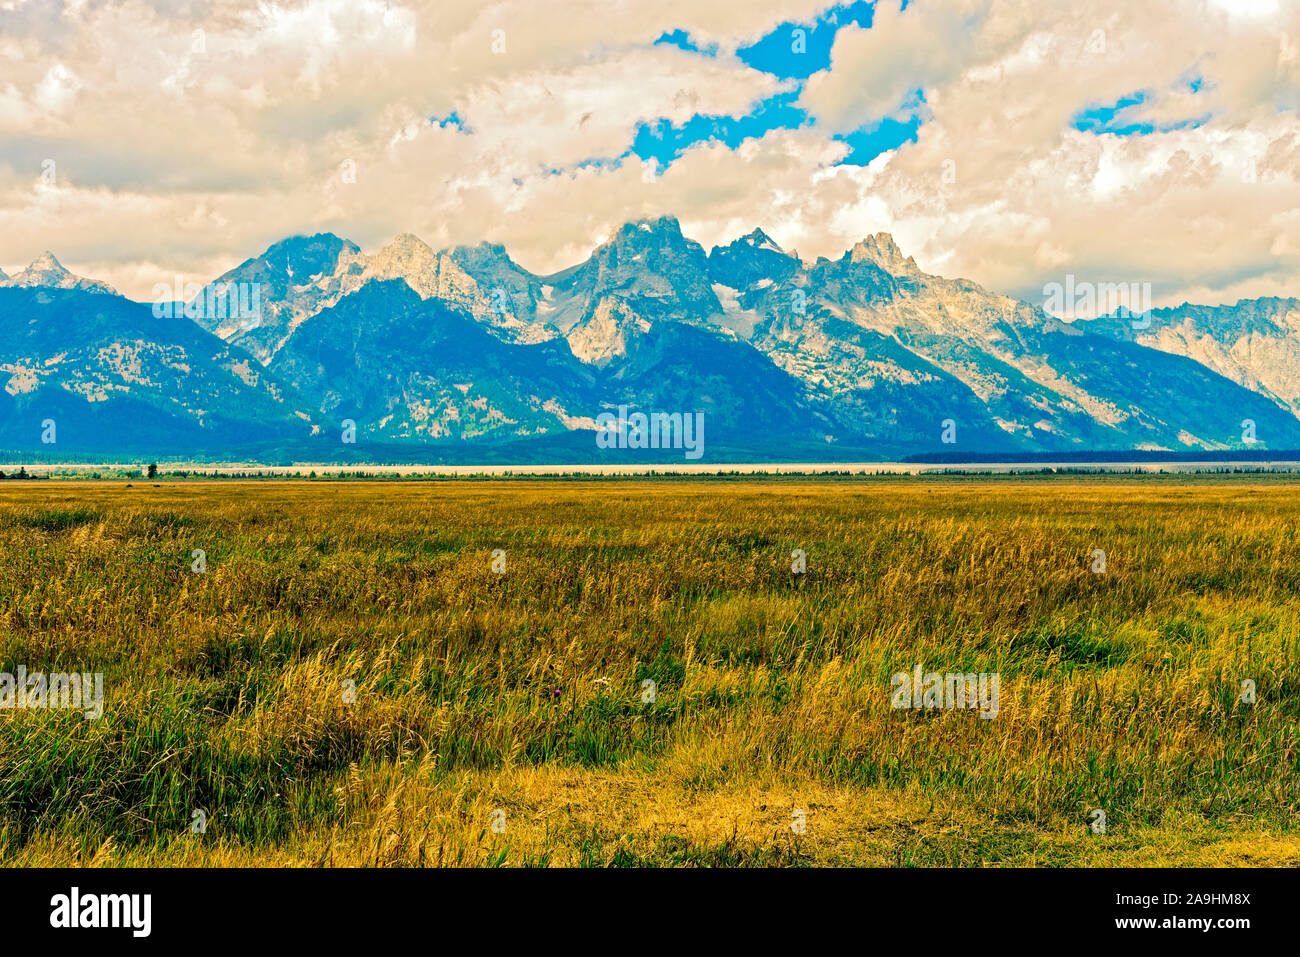 Grassy fertile valley with tall Rocky Mountains beyond under blue skies with white fluffy clouds. Stock Photo